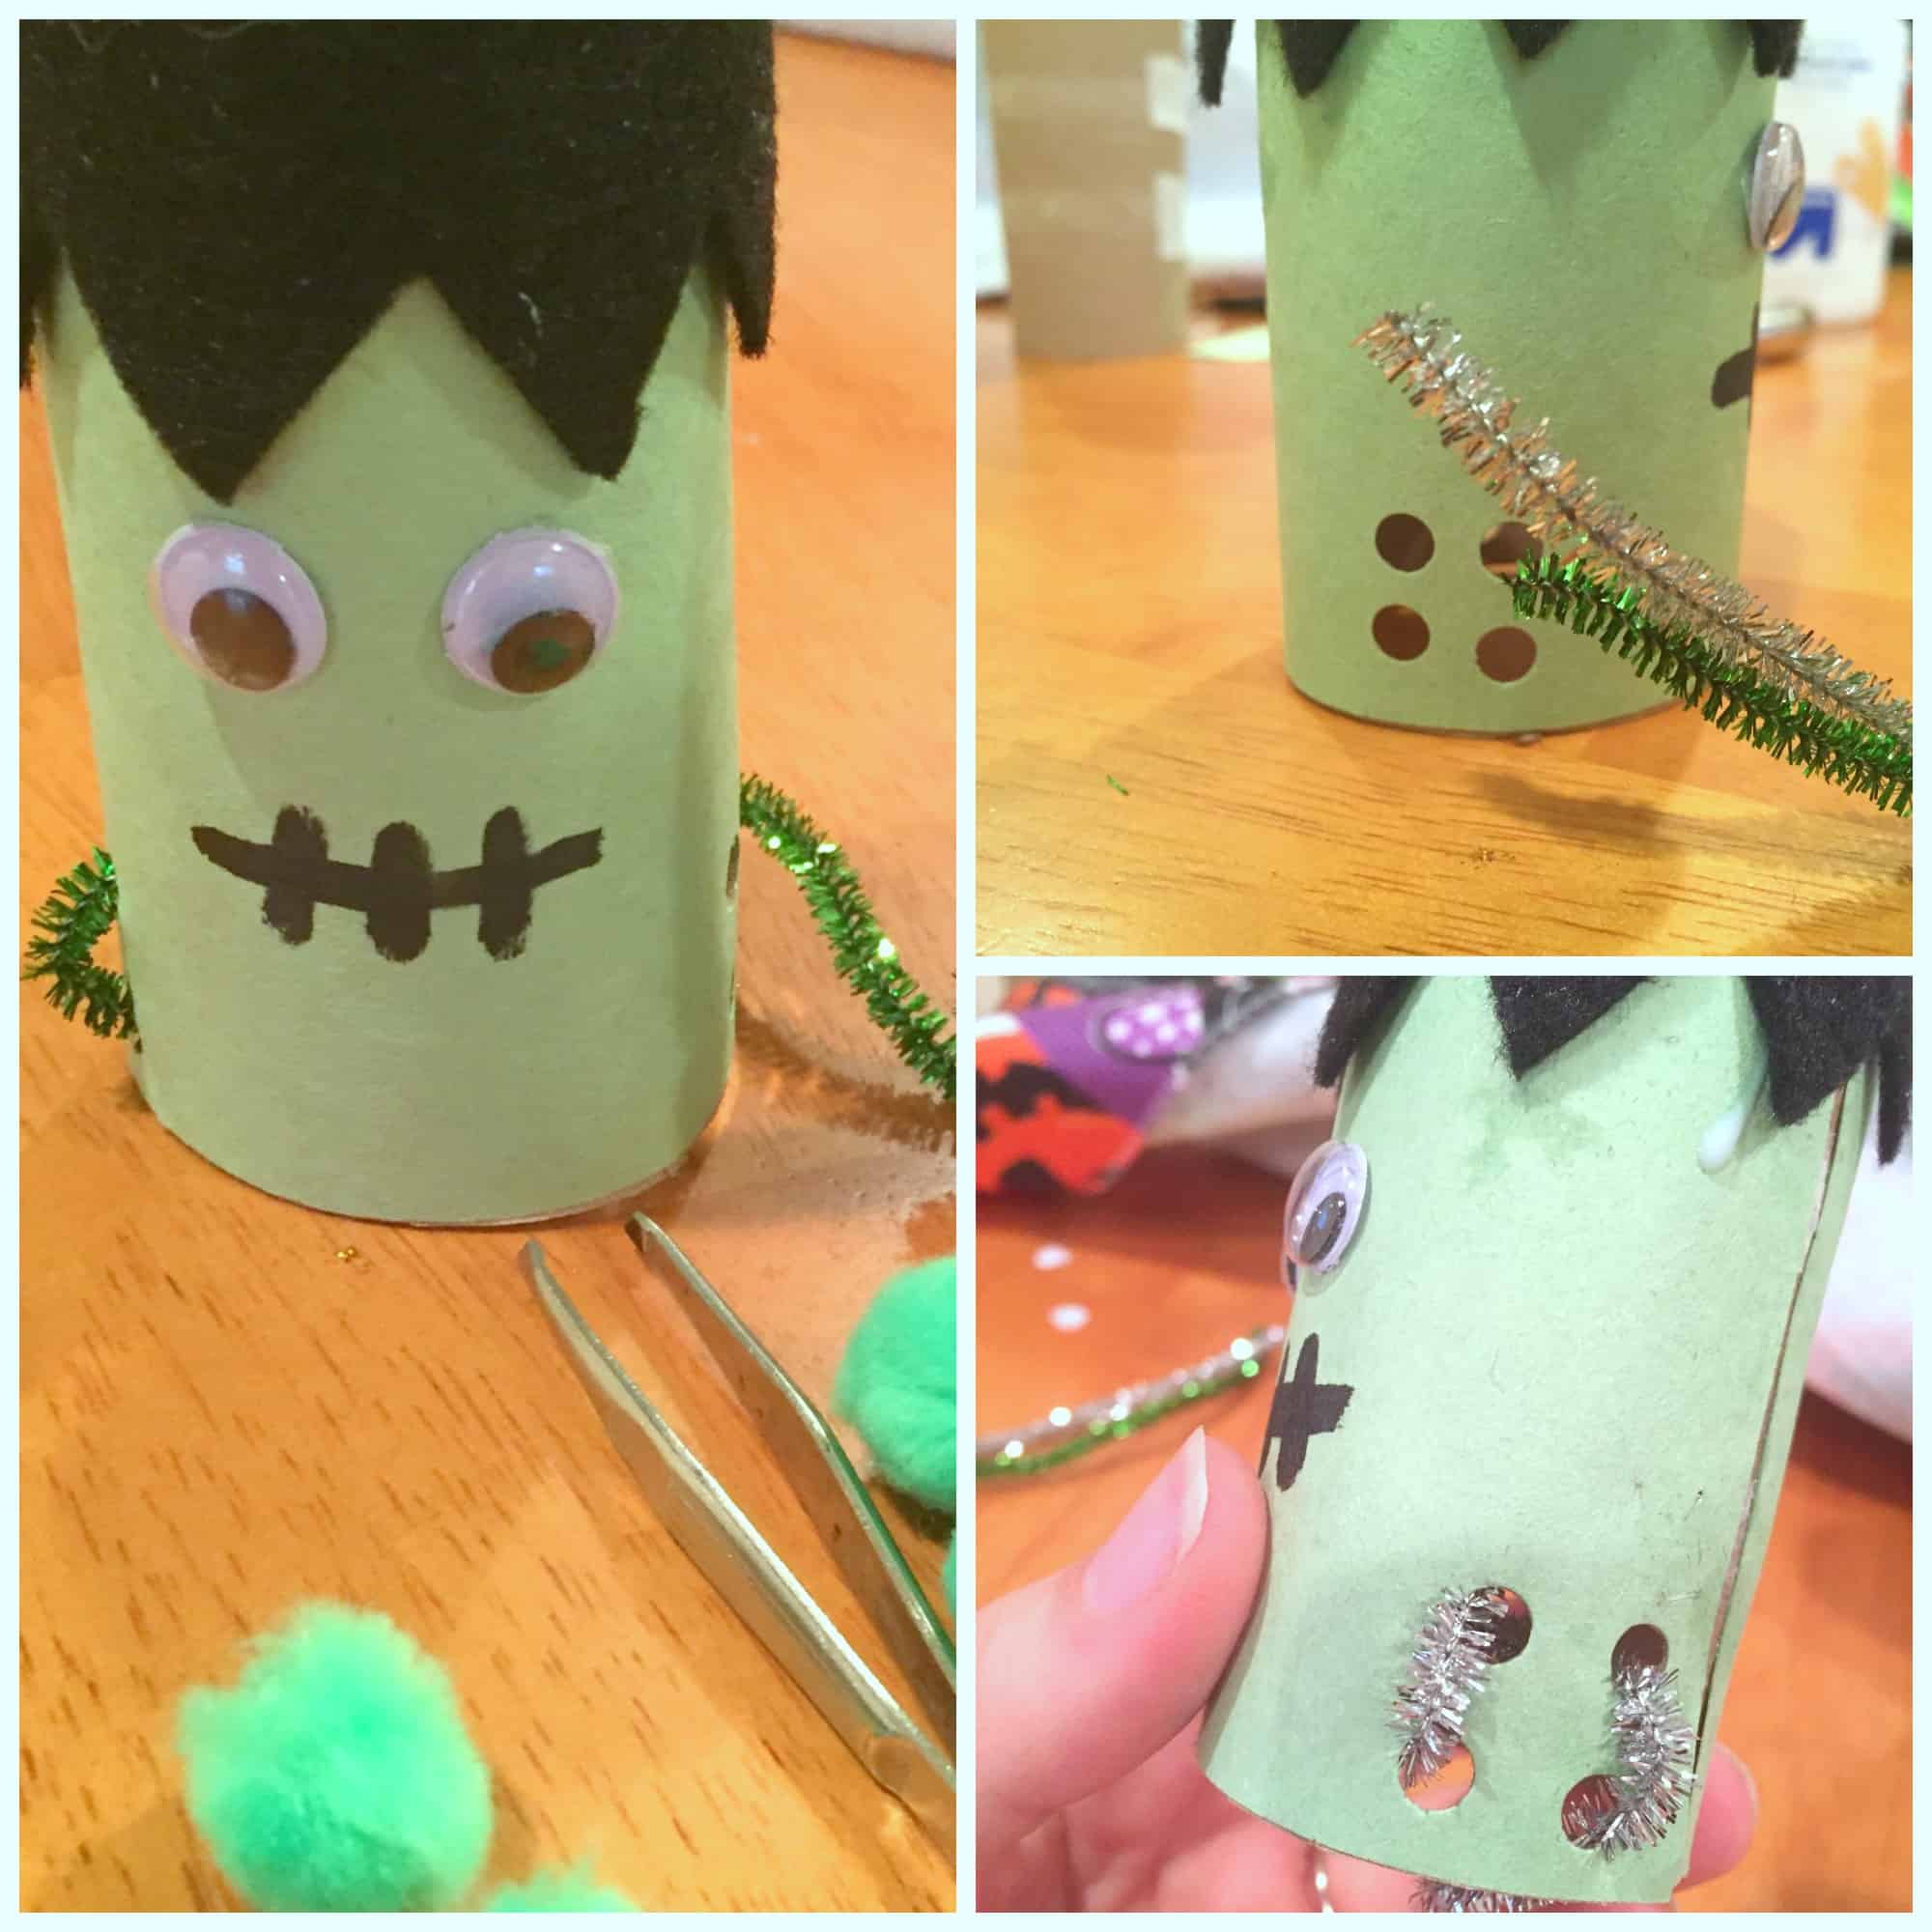 This simple up cycled Halloween craft is perfect for fine motor practice and serves as a great homemade game! Doubles as cute decor!